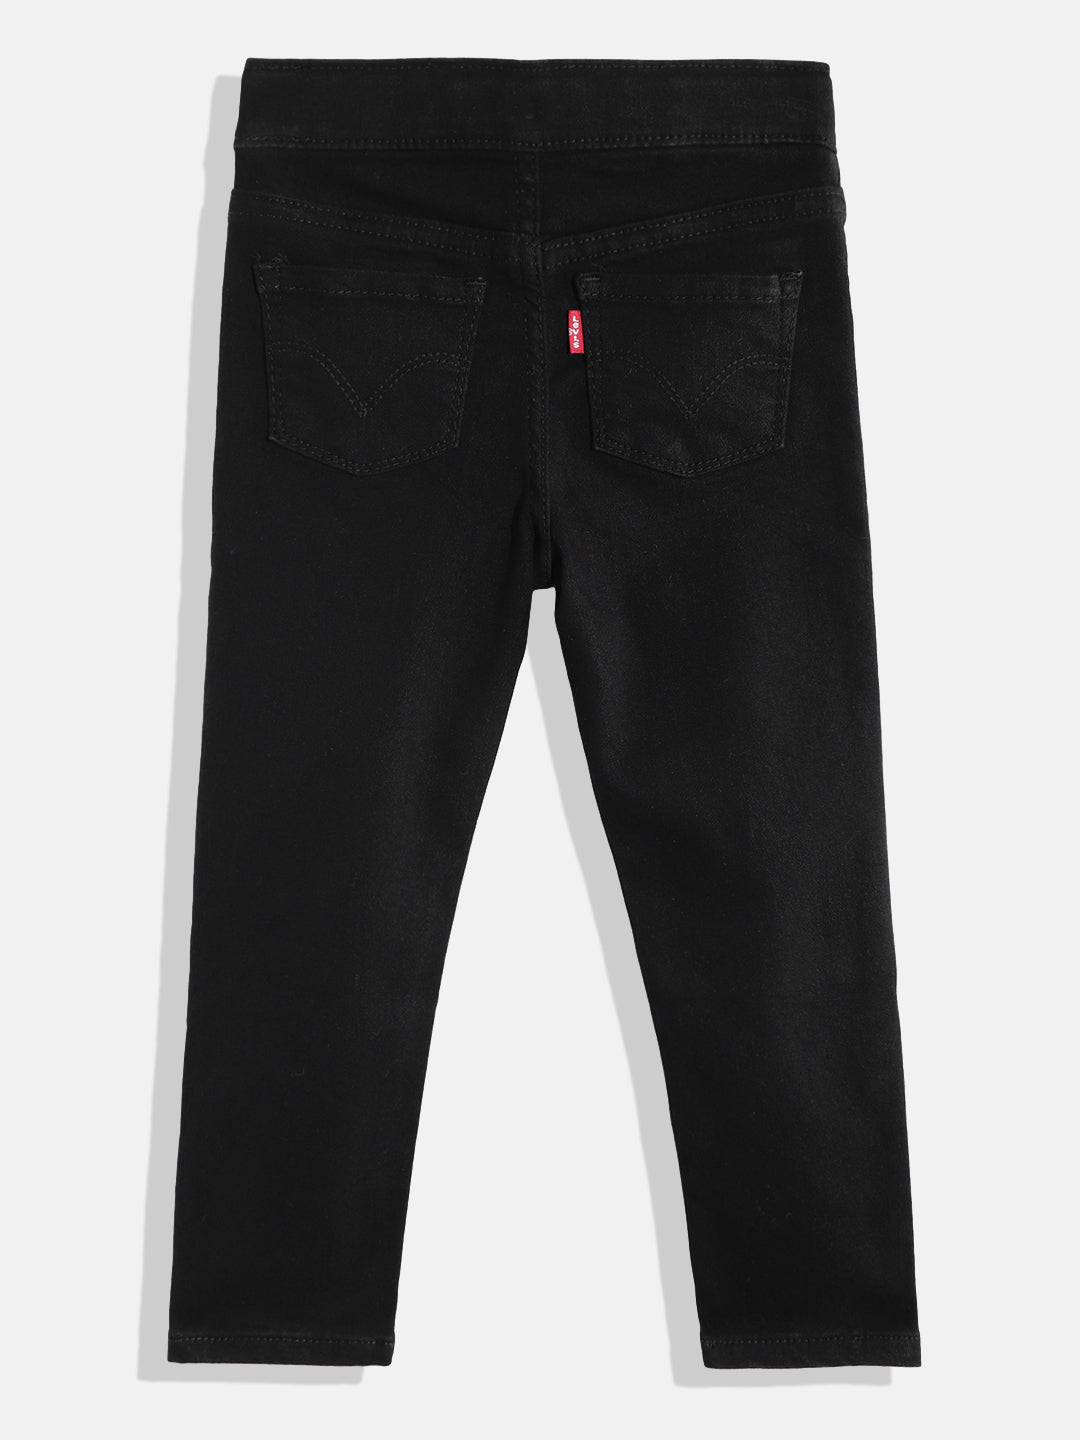 Pull-on Jeggings by Levi's® - black, Girls